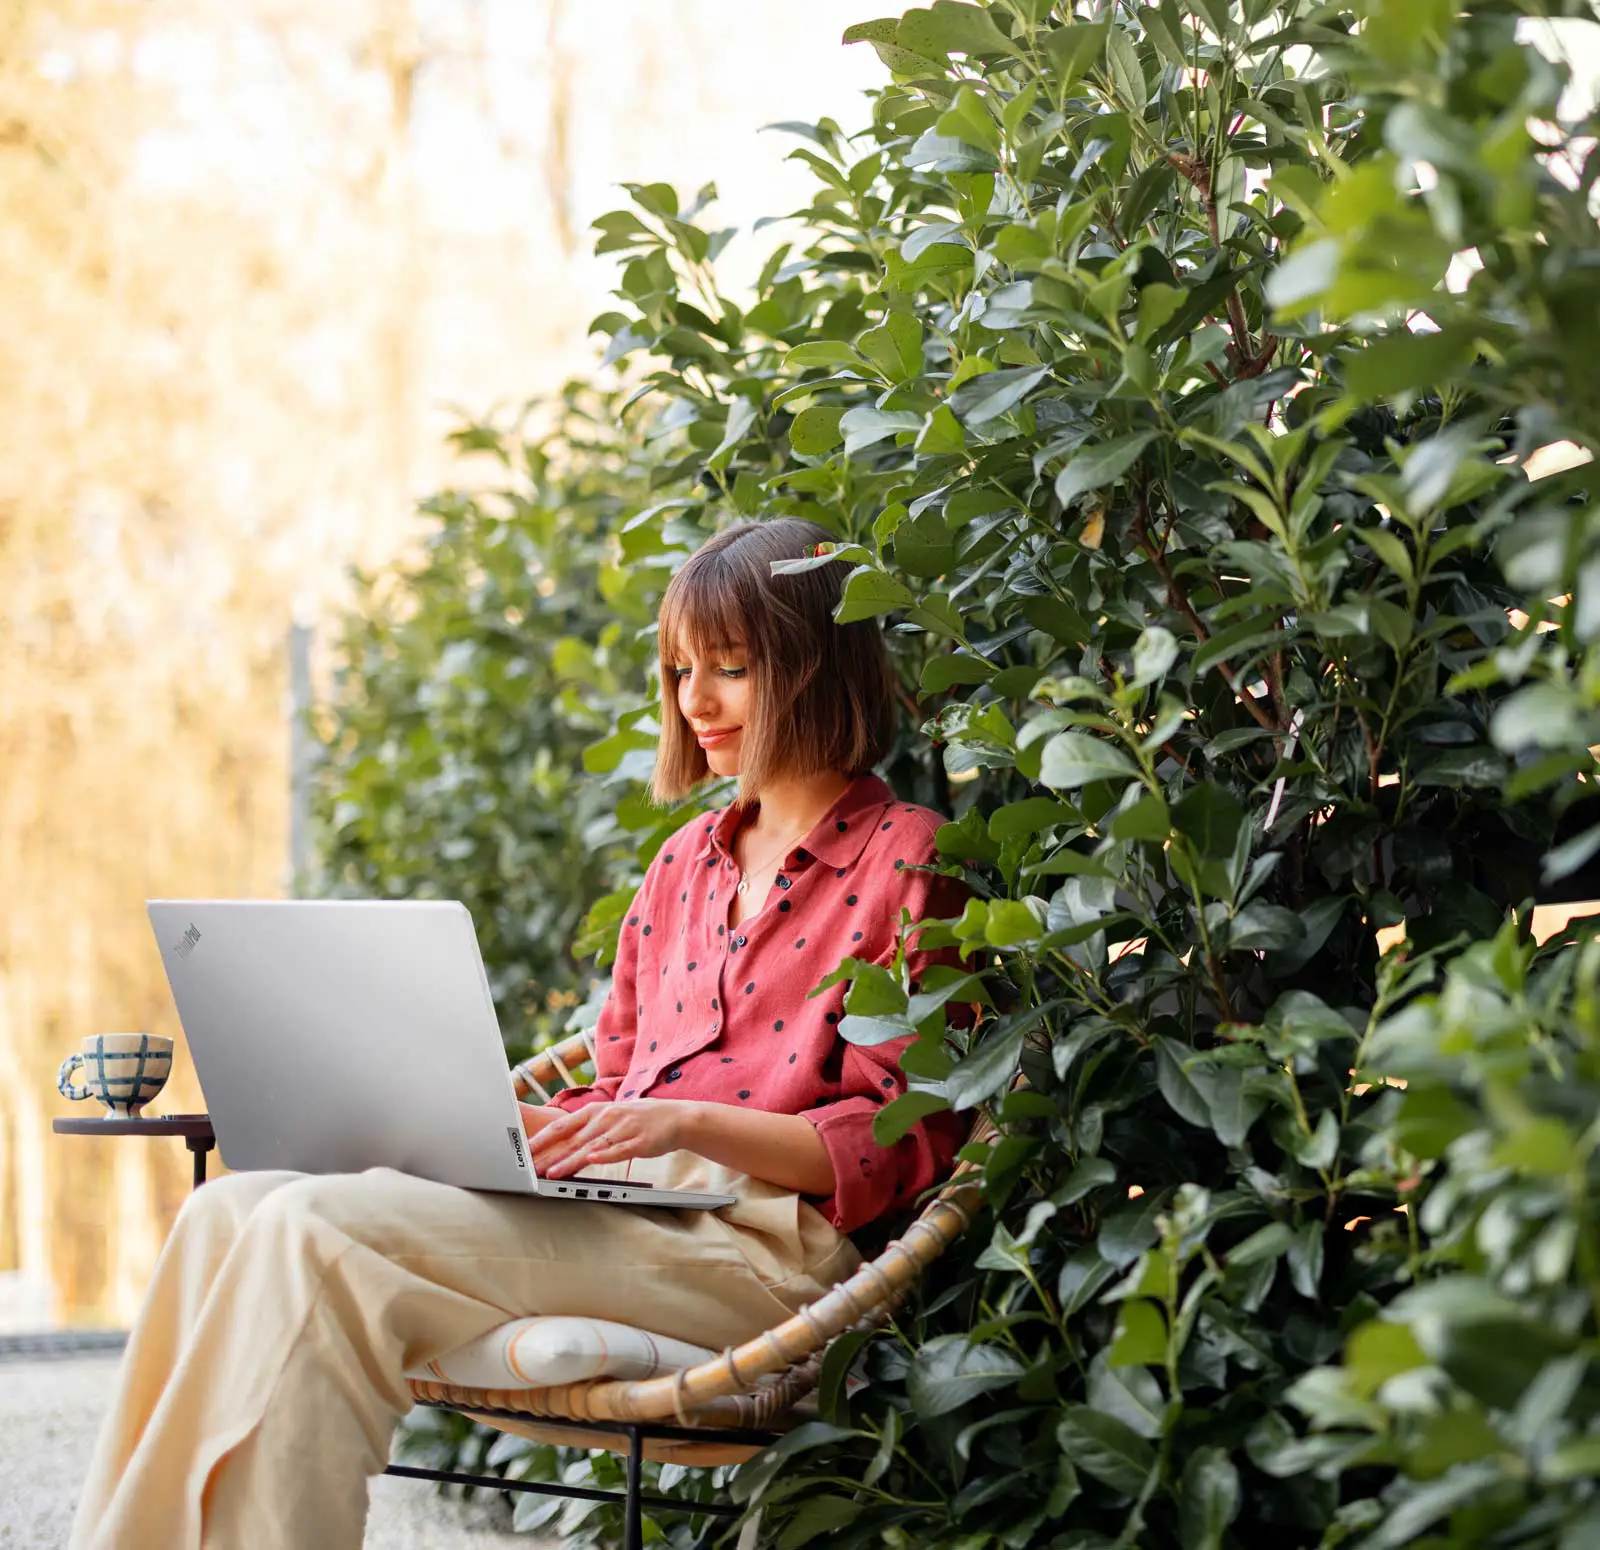 A woman working on her laptop while sitting in front of a plant wall in a garden.